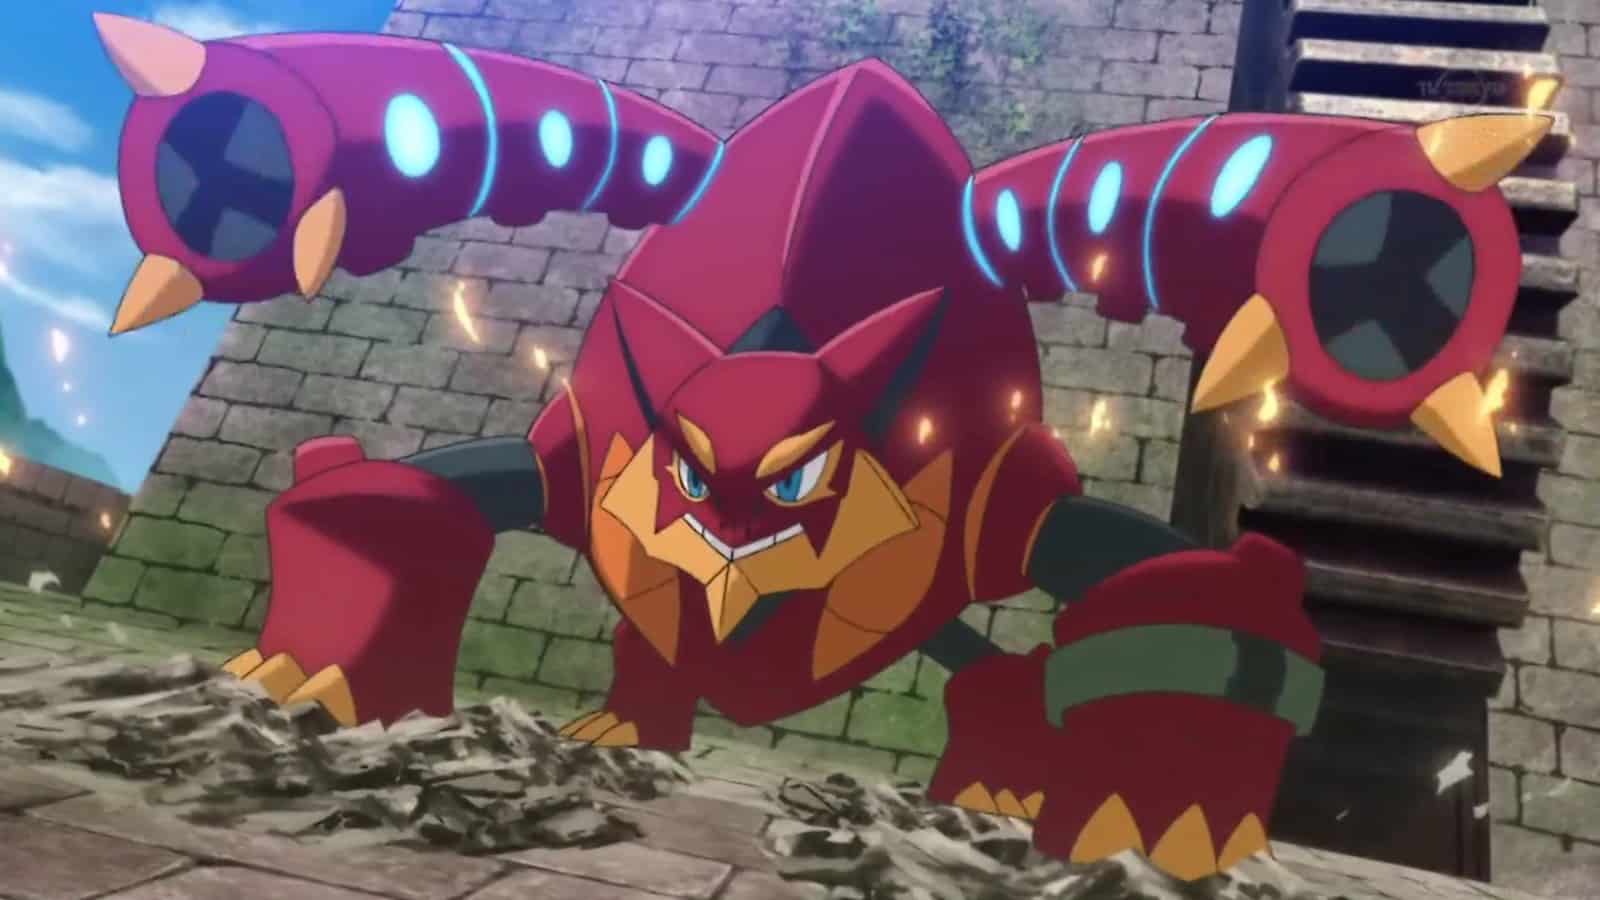 An image of Volcanion one of the best water type Pokemon.